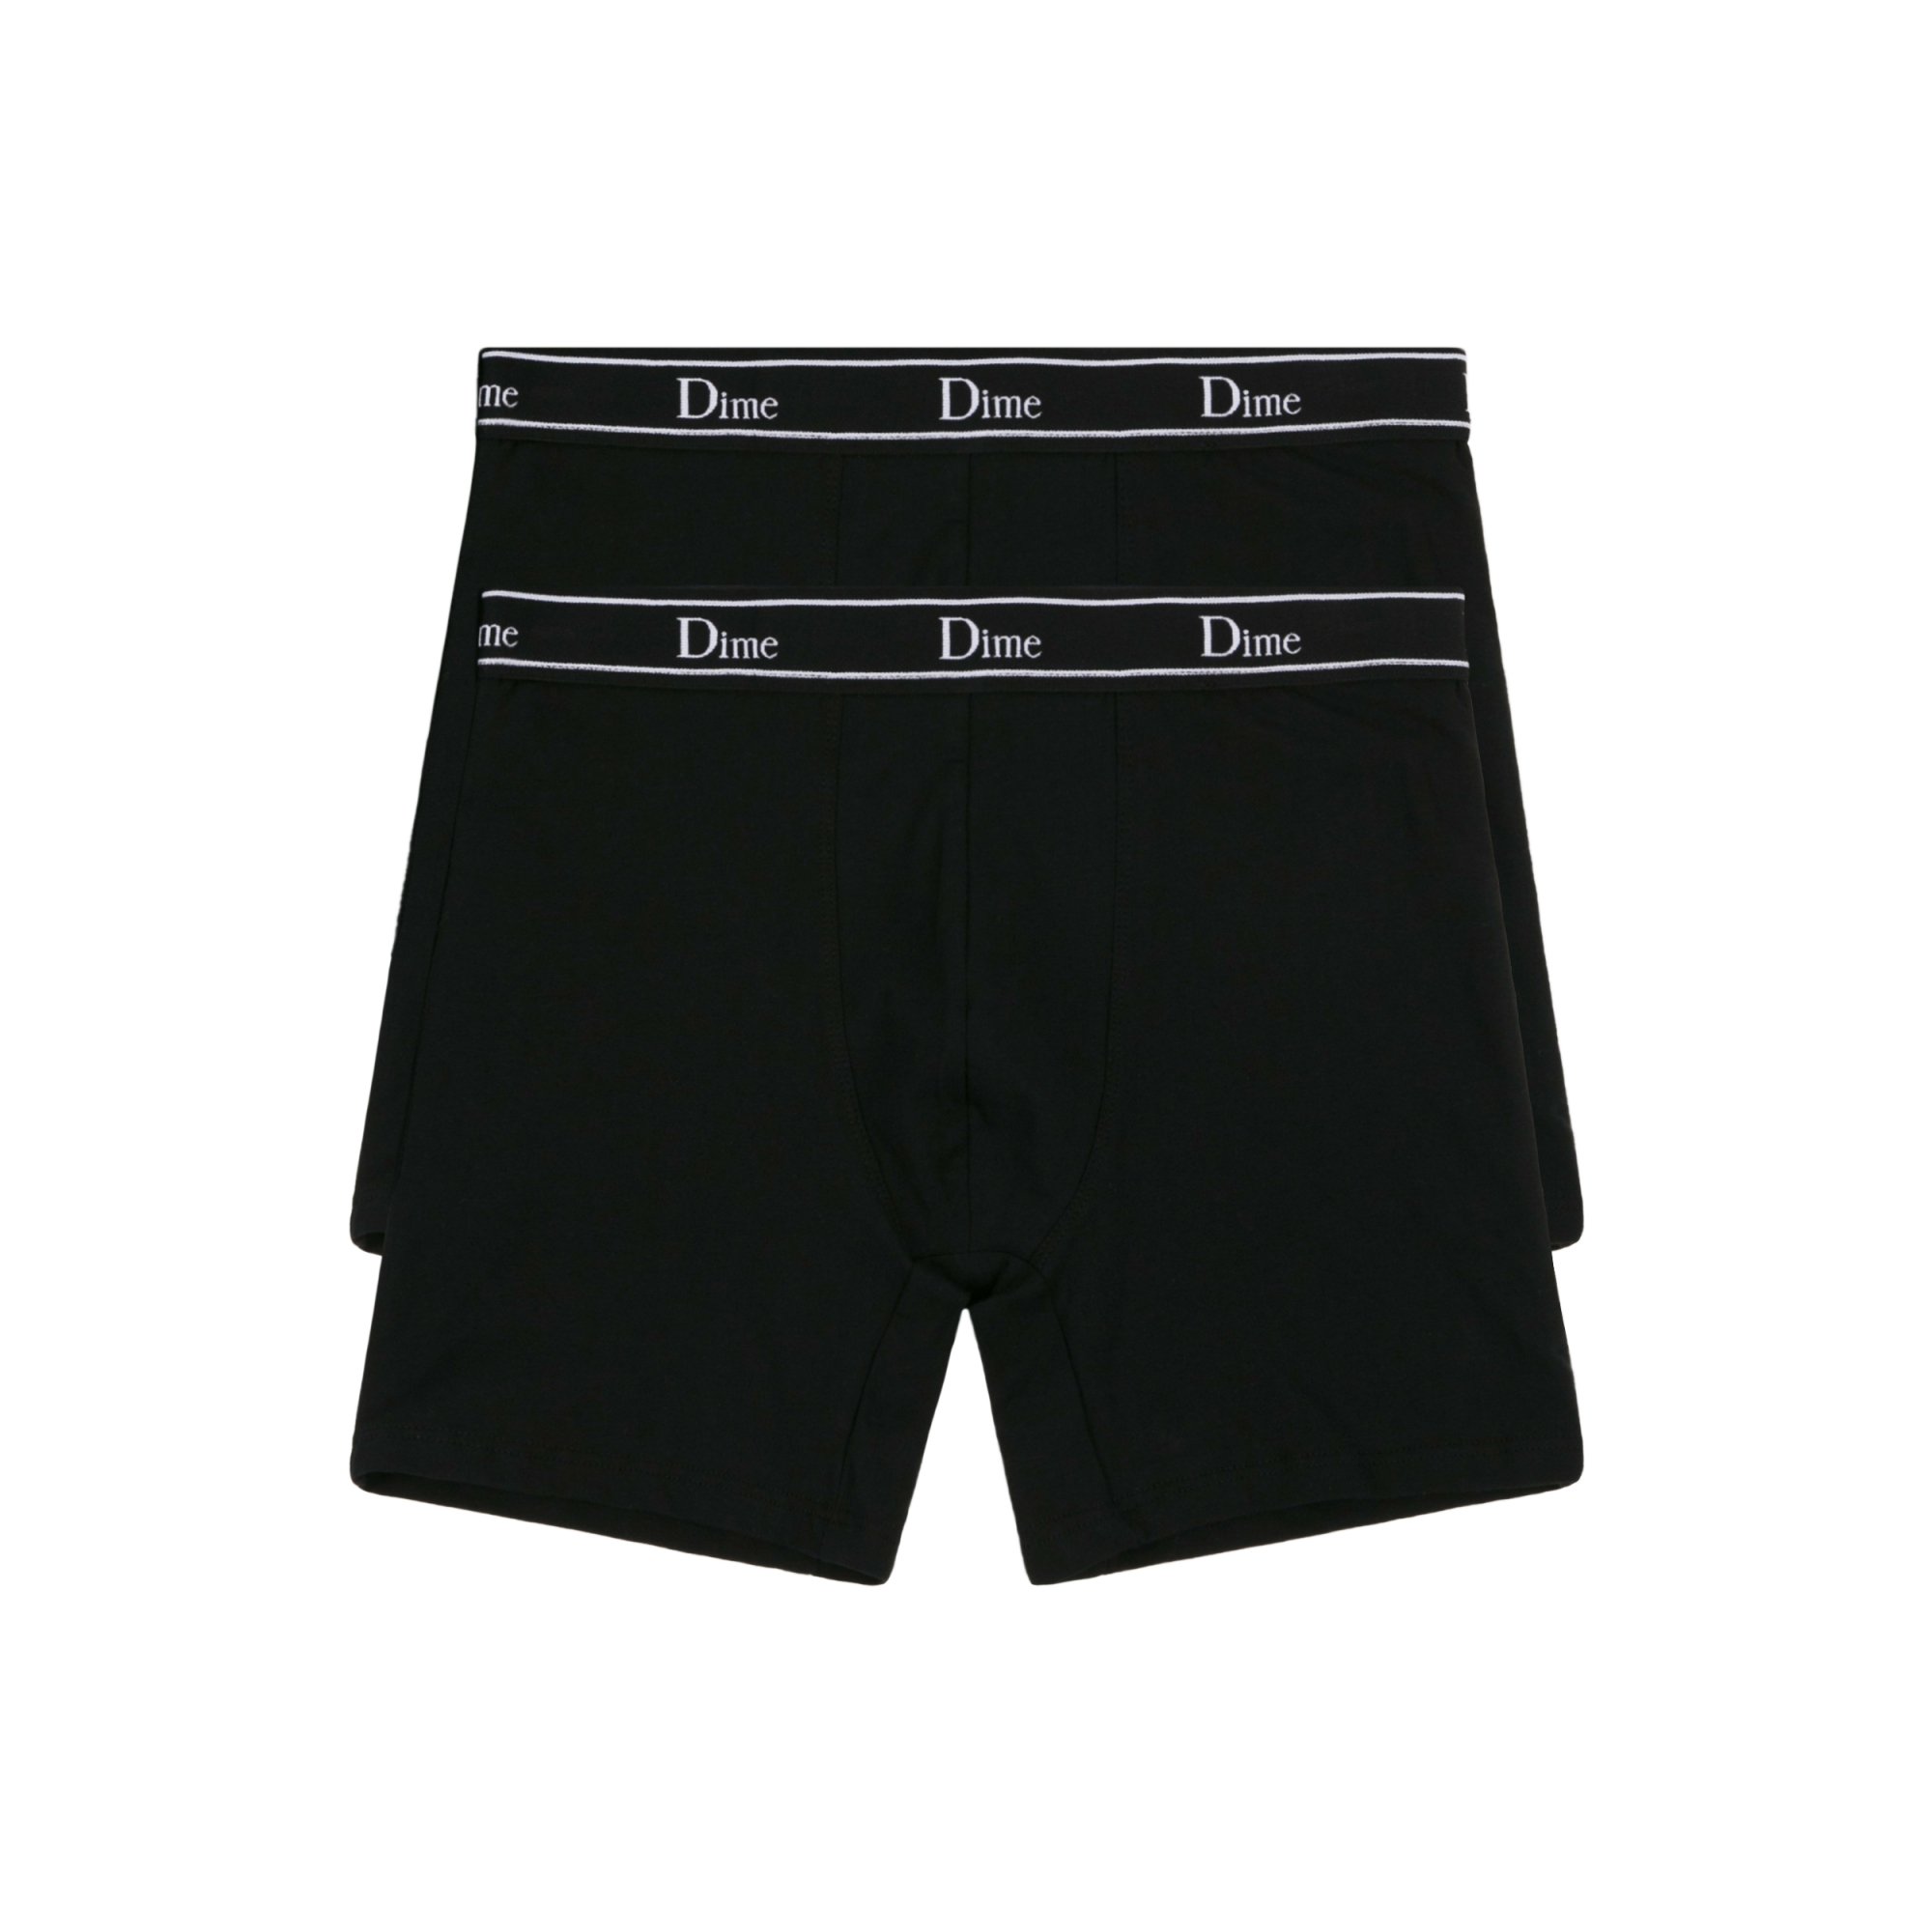 DIME<br>CLASSIC 2 PACK UNDERWEAR<br>